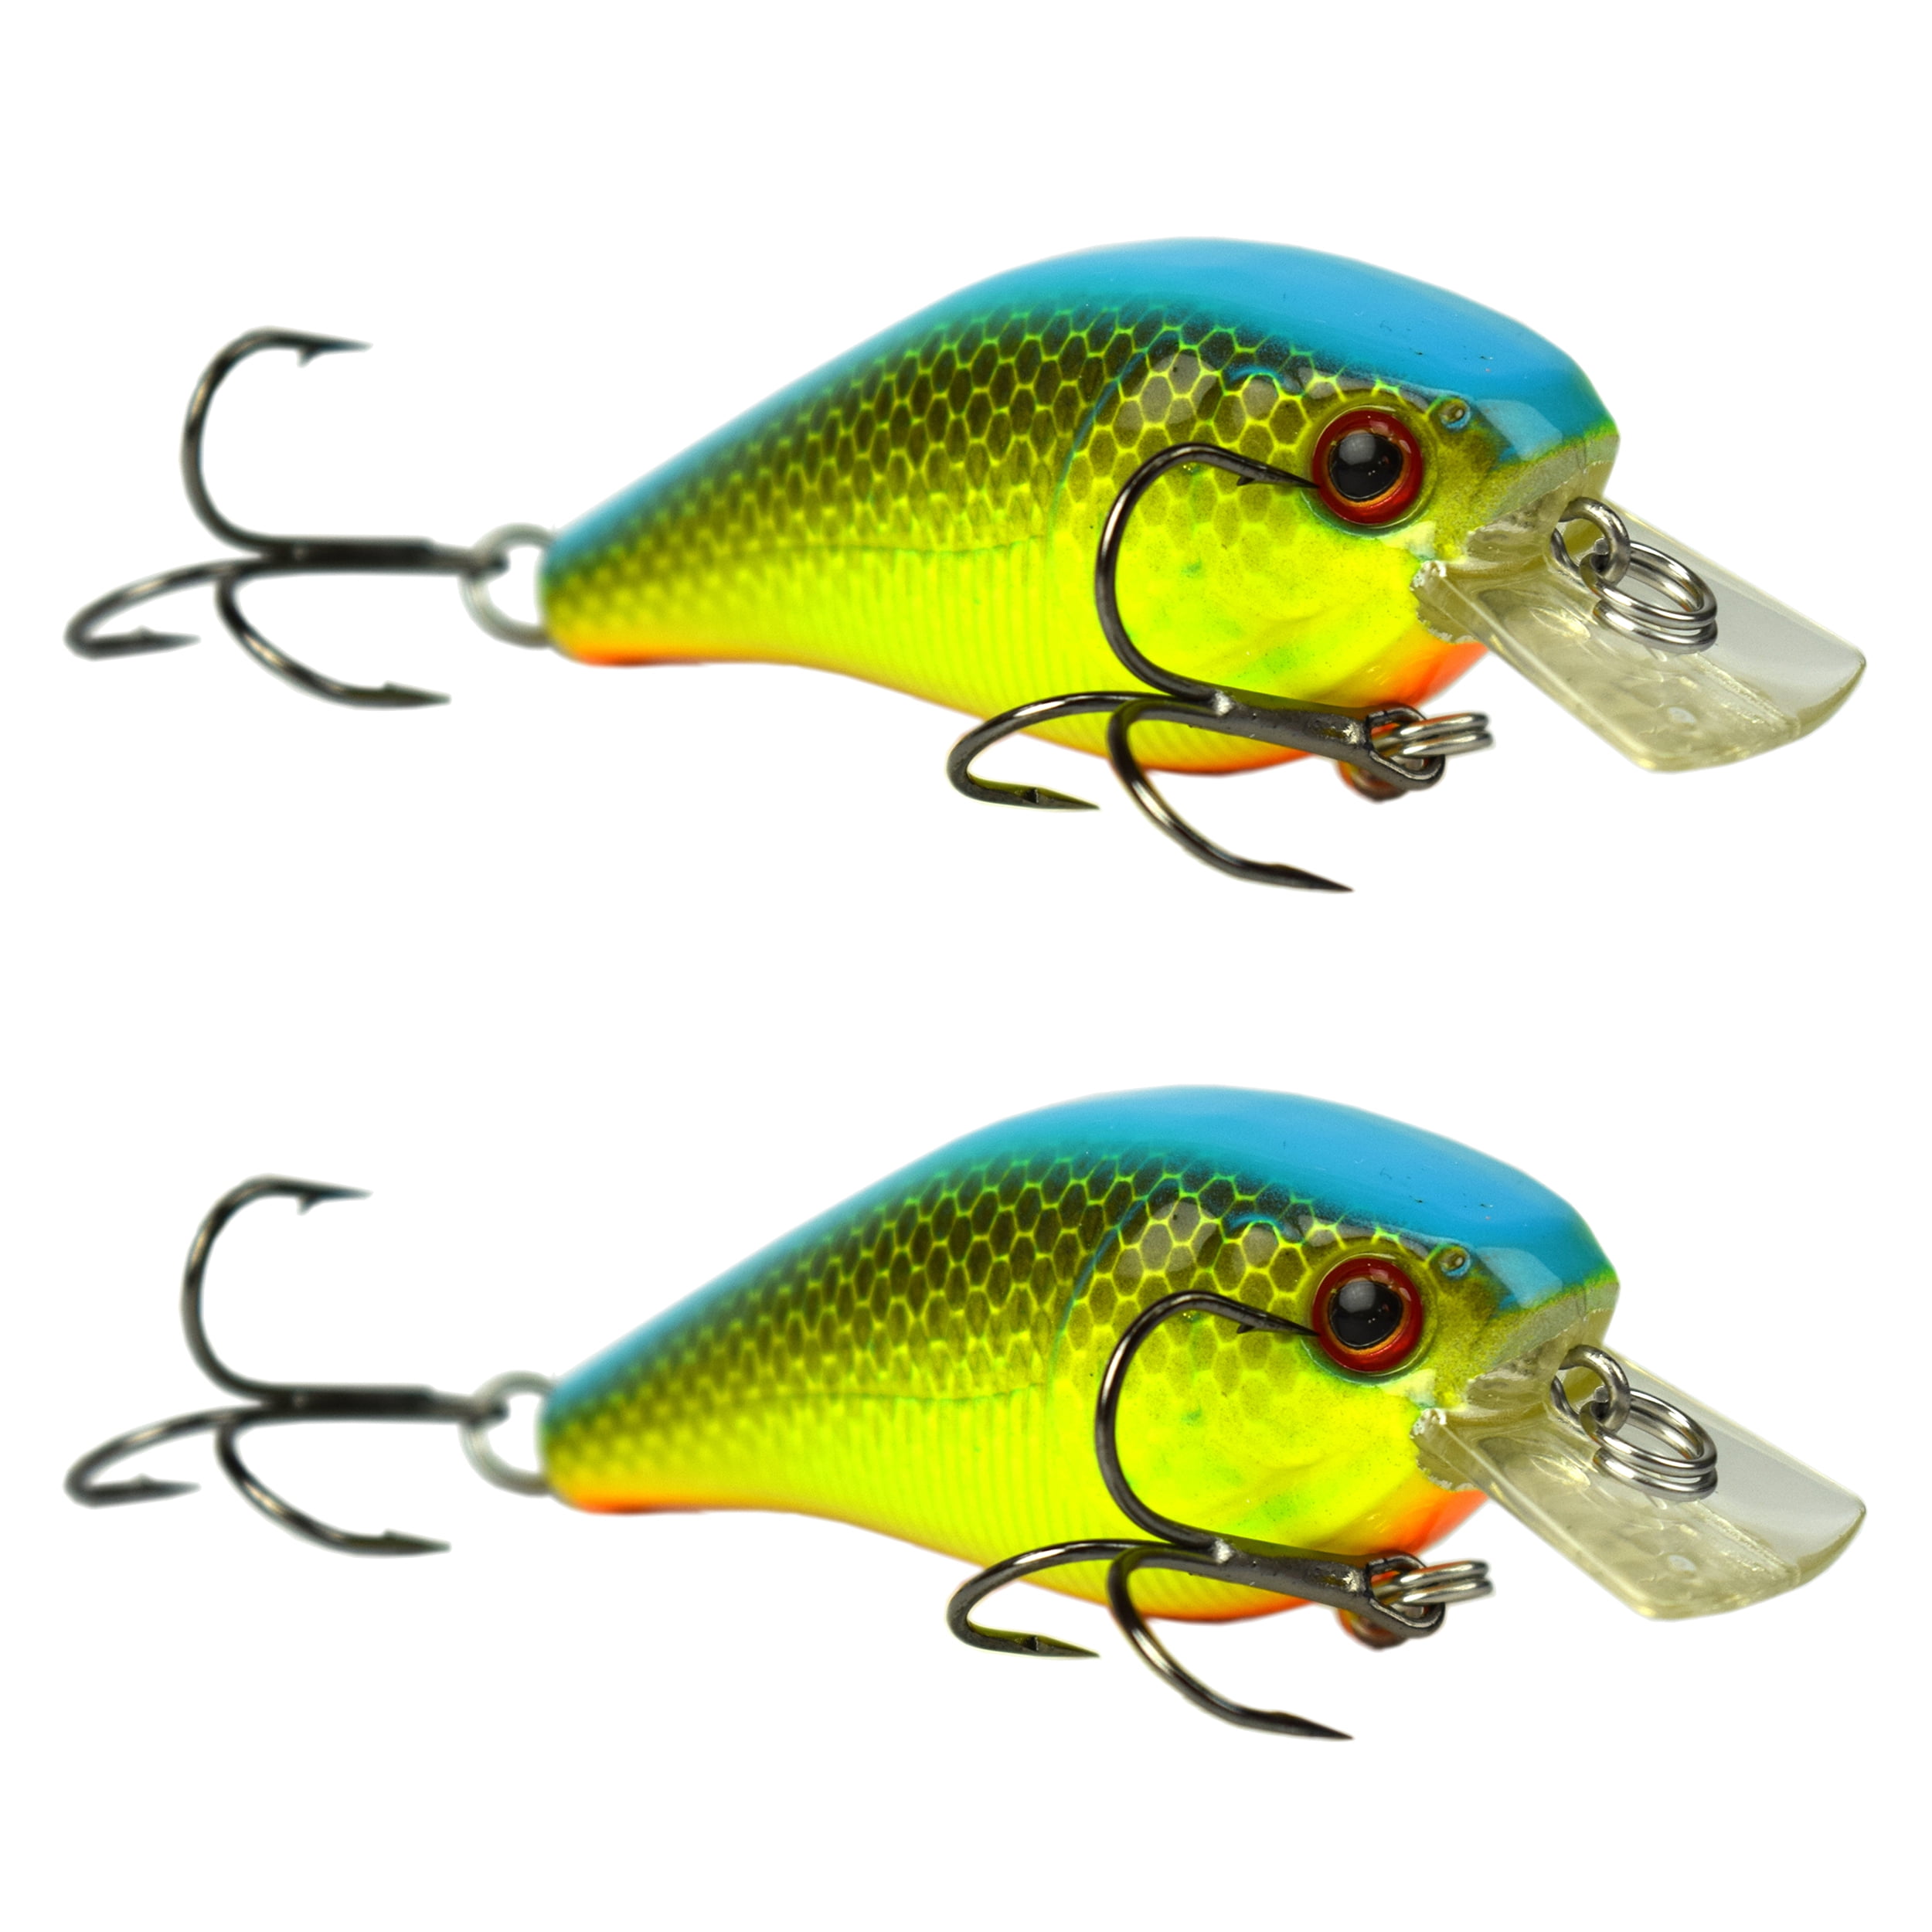 Tackle HD 2-Pack Square Bill Crankbait, 2.75 Lipped Rattle Crankbaits with  Fishing Hooks, Top Water Fishing Lures for Crappie, Walleye, Perch, or Bass  Fishing, Chartreuse Blue Back 